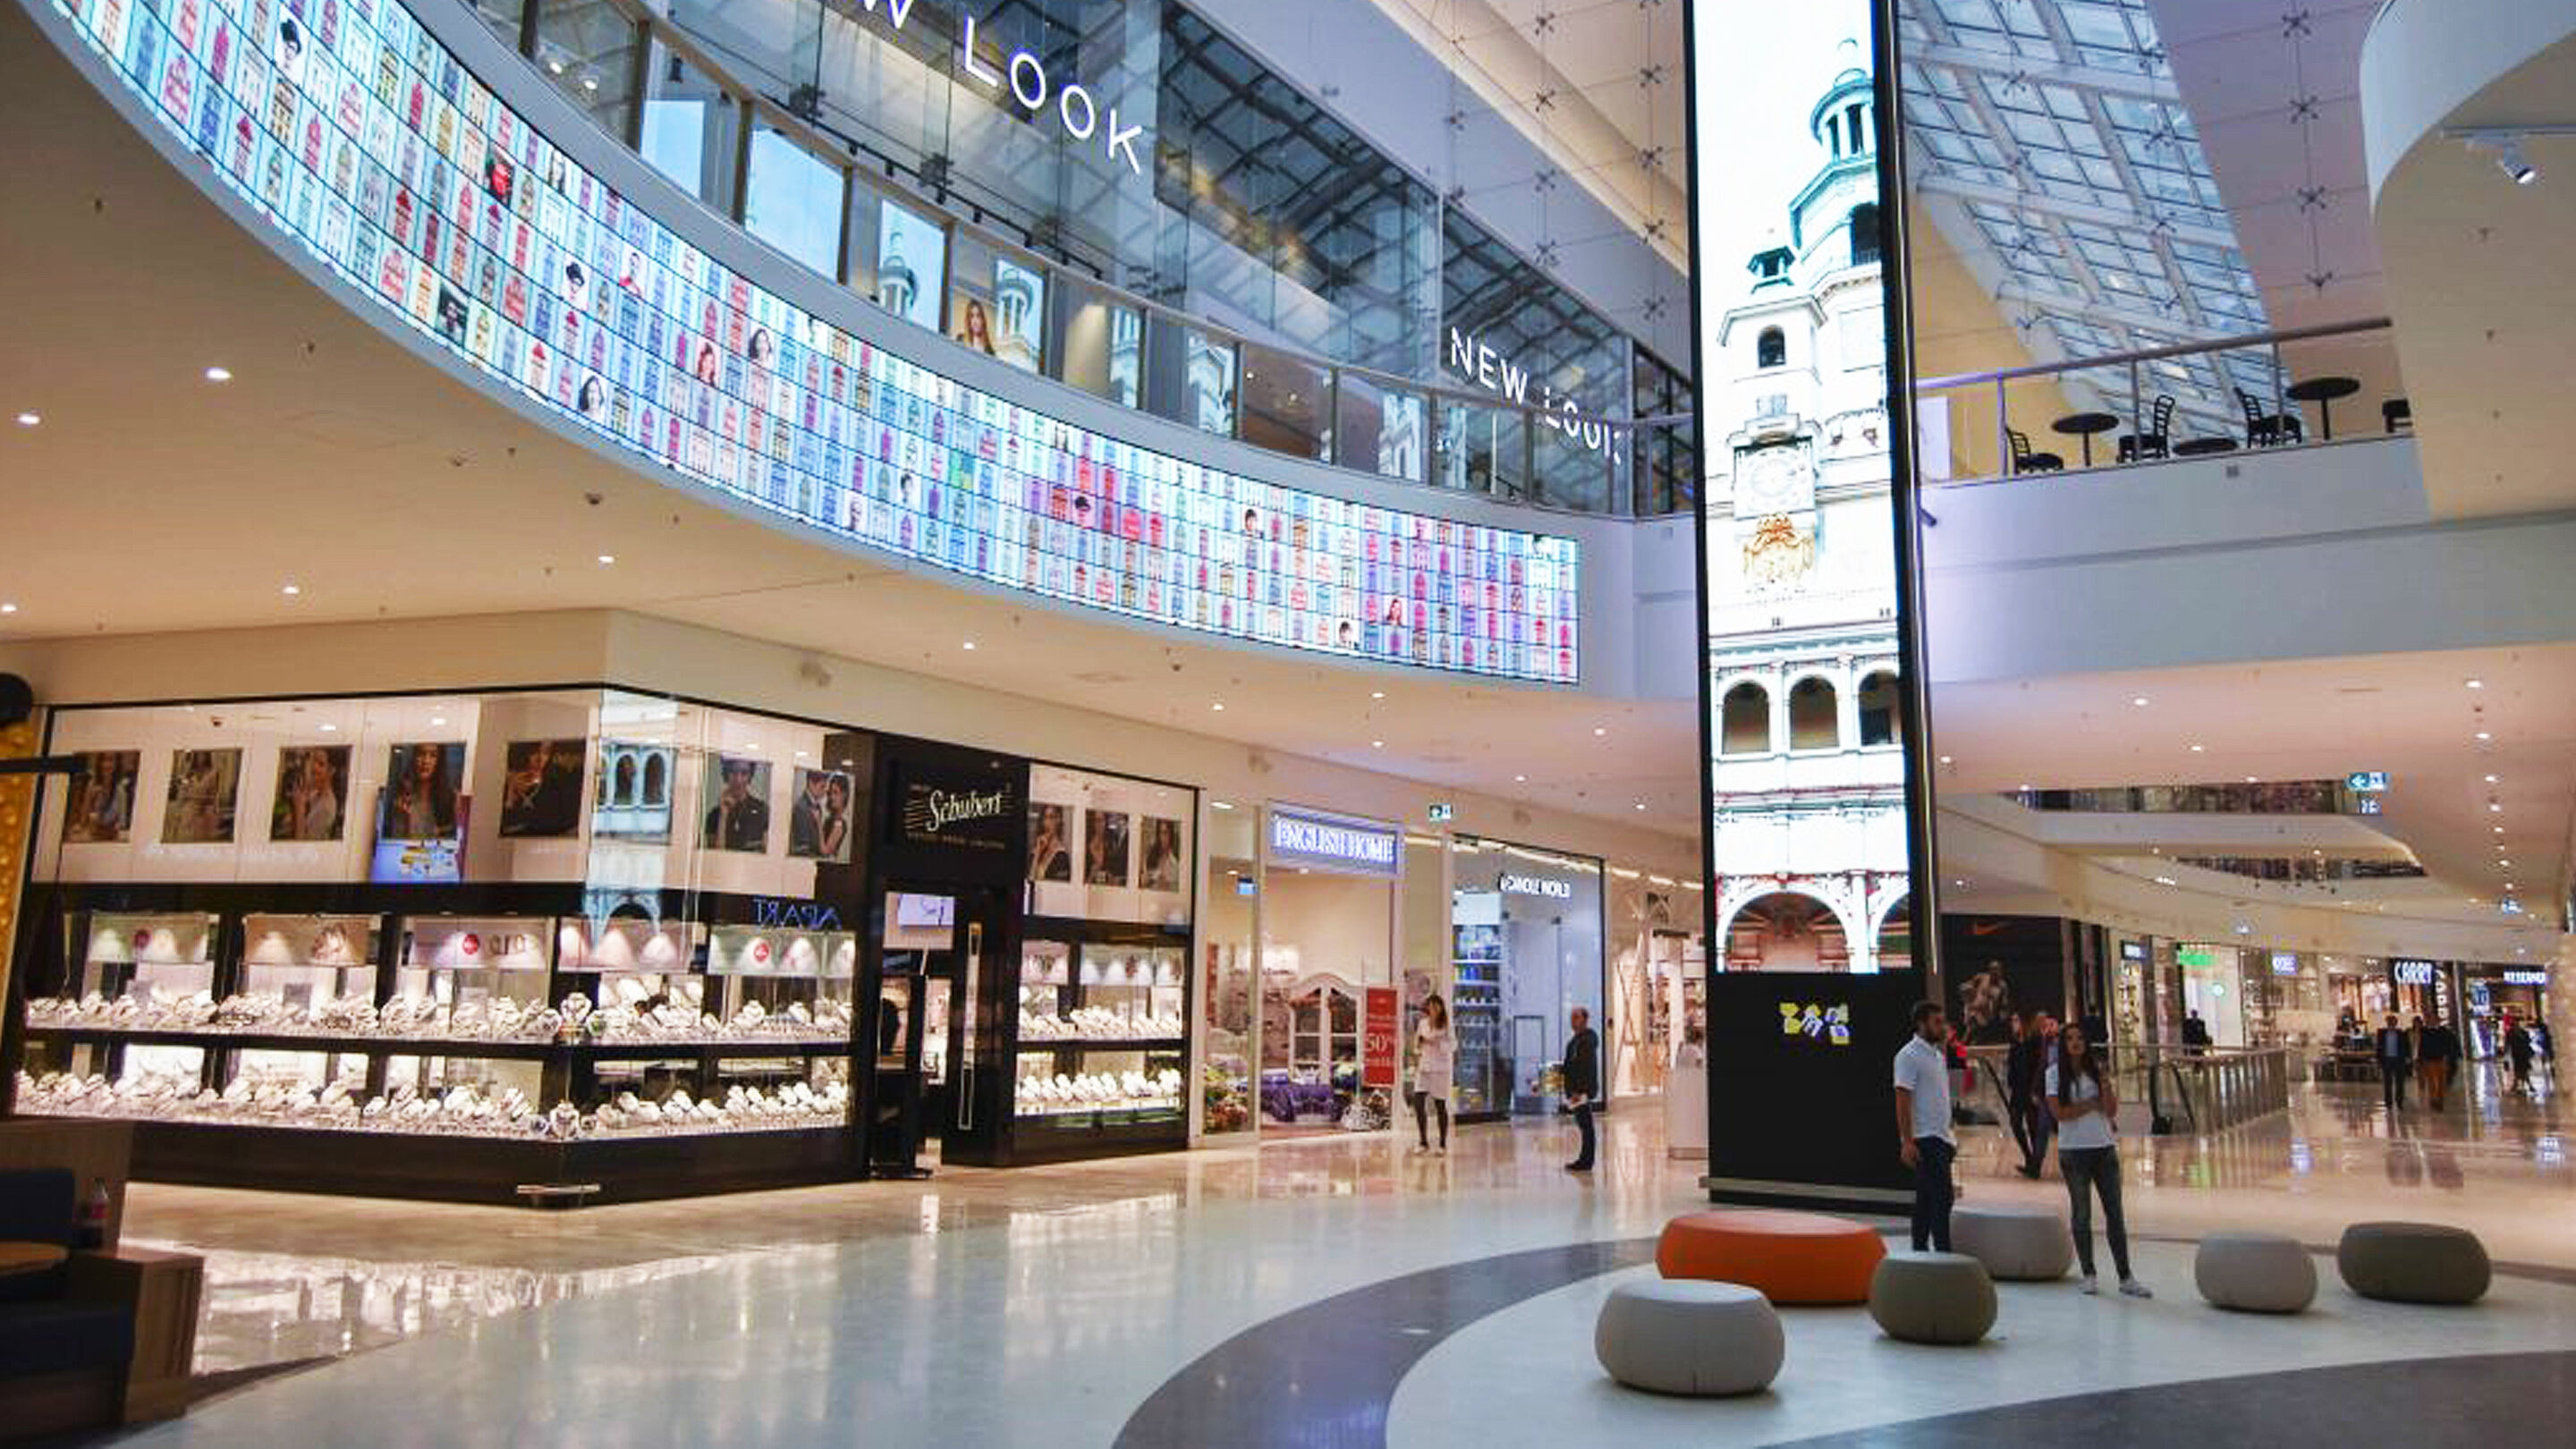 Posnania Shopping Center Opens with a Revolutionary Digital Signage System